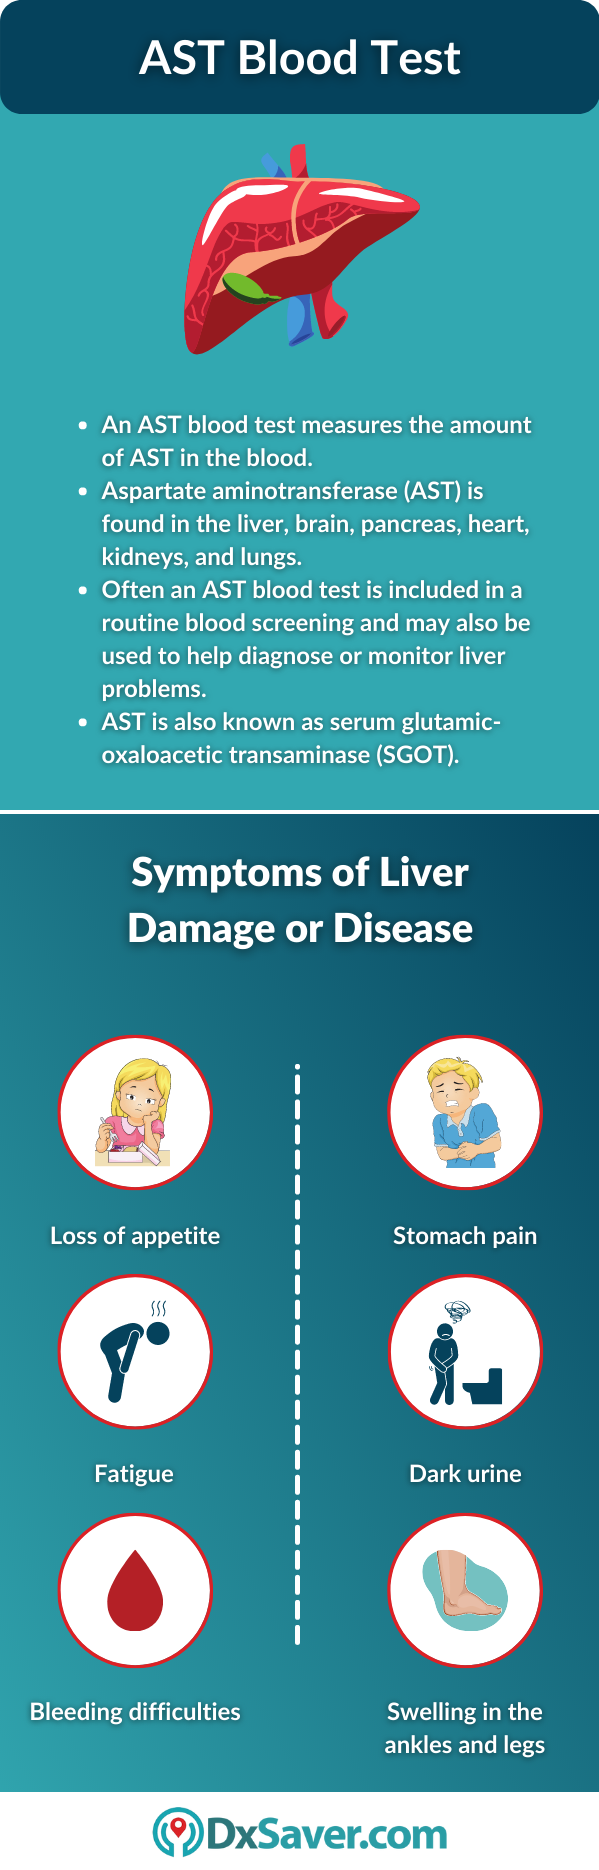 AST Blood Test and Symptoms of Liver Damage or Disease